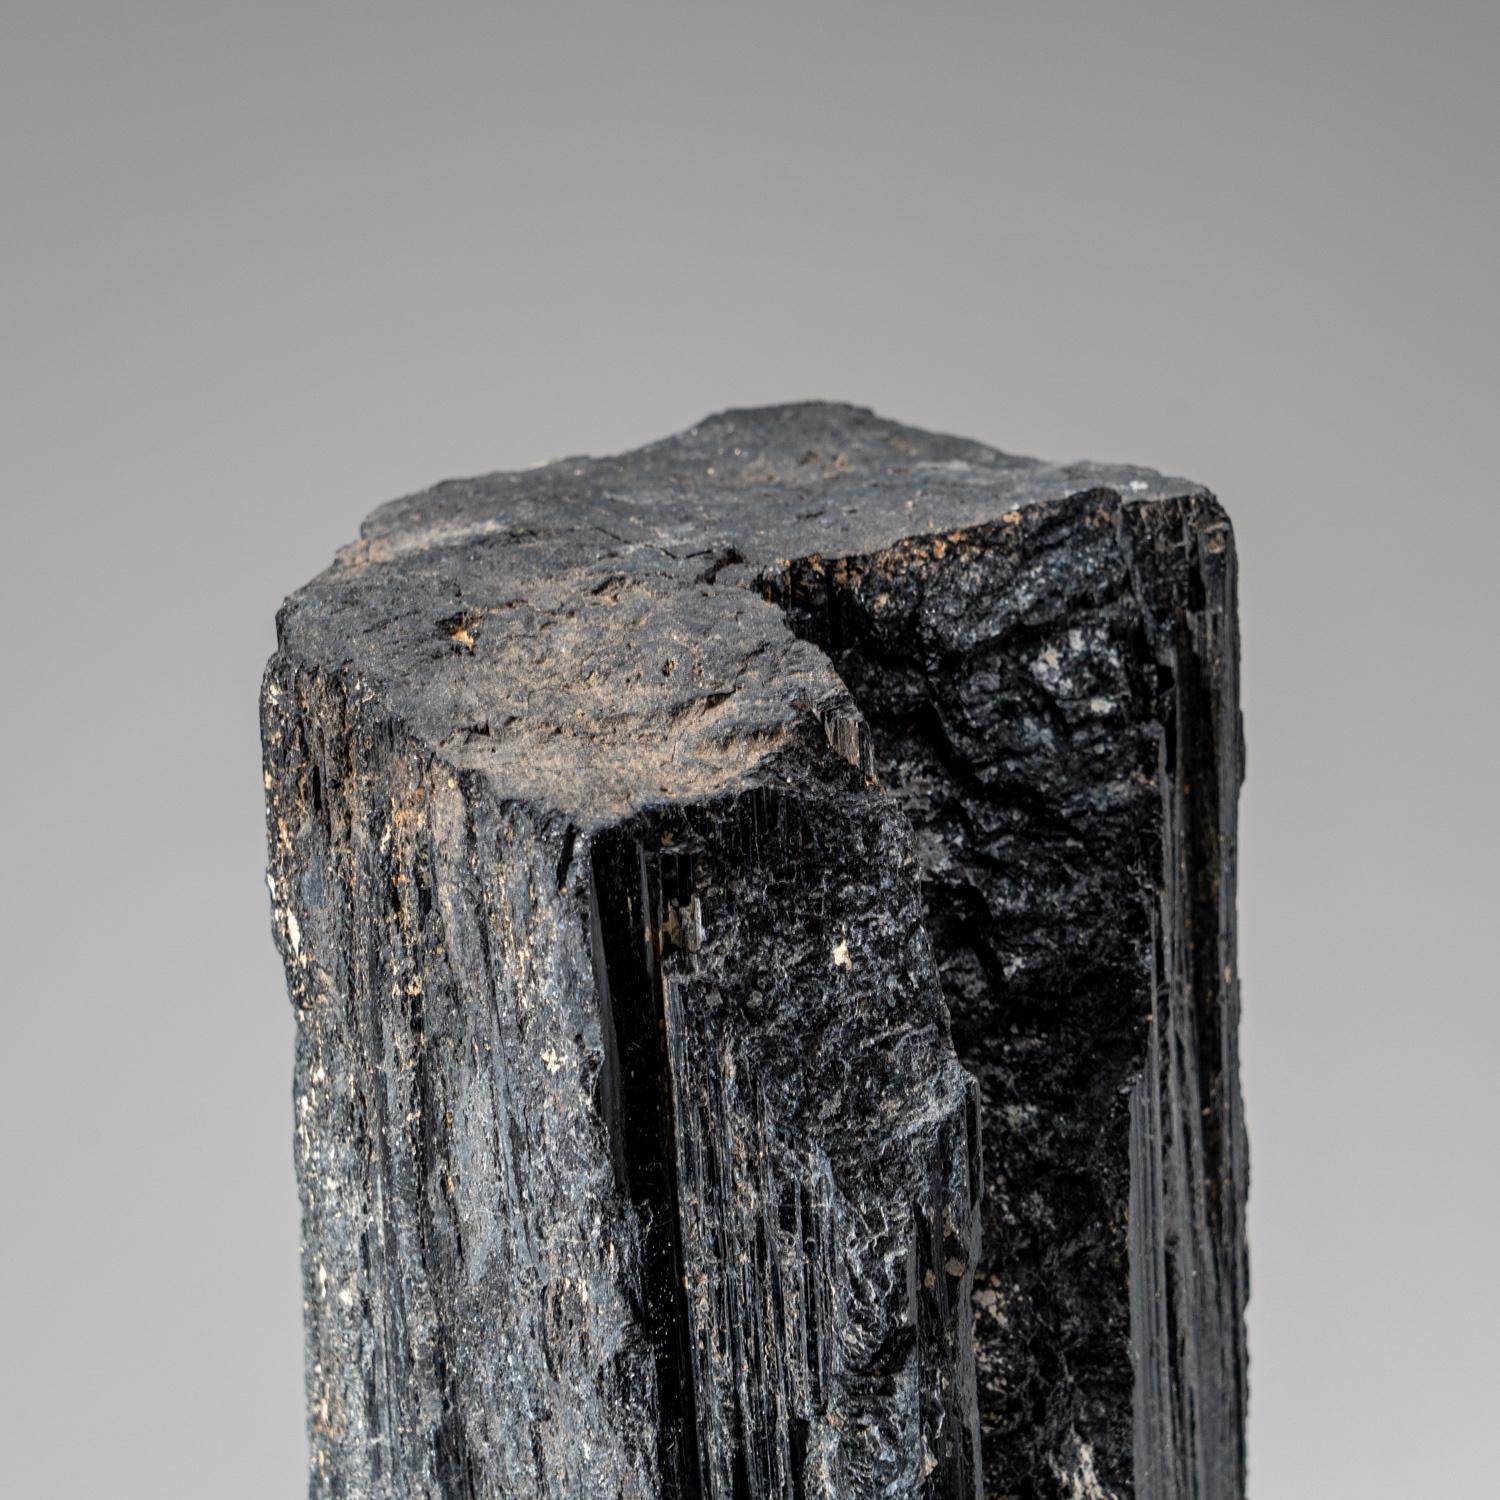 AAA quality raw black tourmaline crystal from India. This Specimen deeply striated, with a high-wet luster.

Under Black Tourmaline's protection, not even the worst downer can burst your bubble. Known as one of the premier crystals for protection,